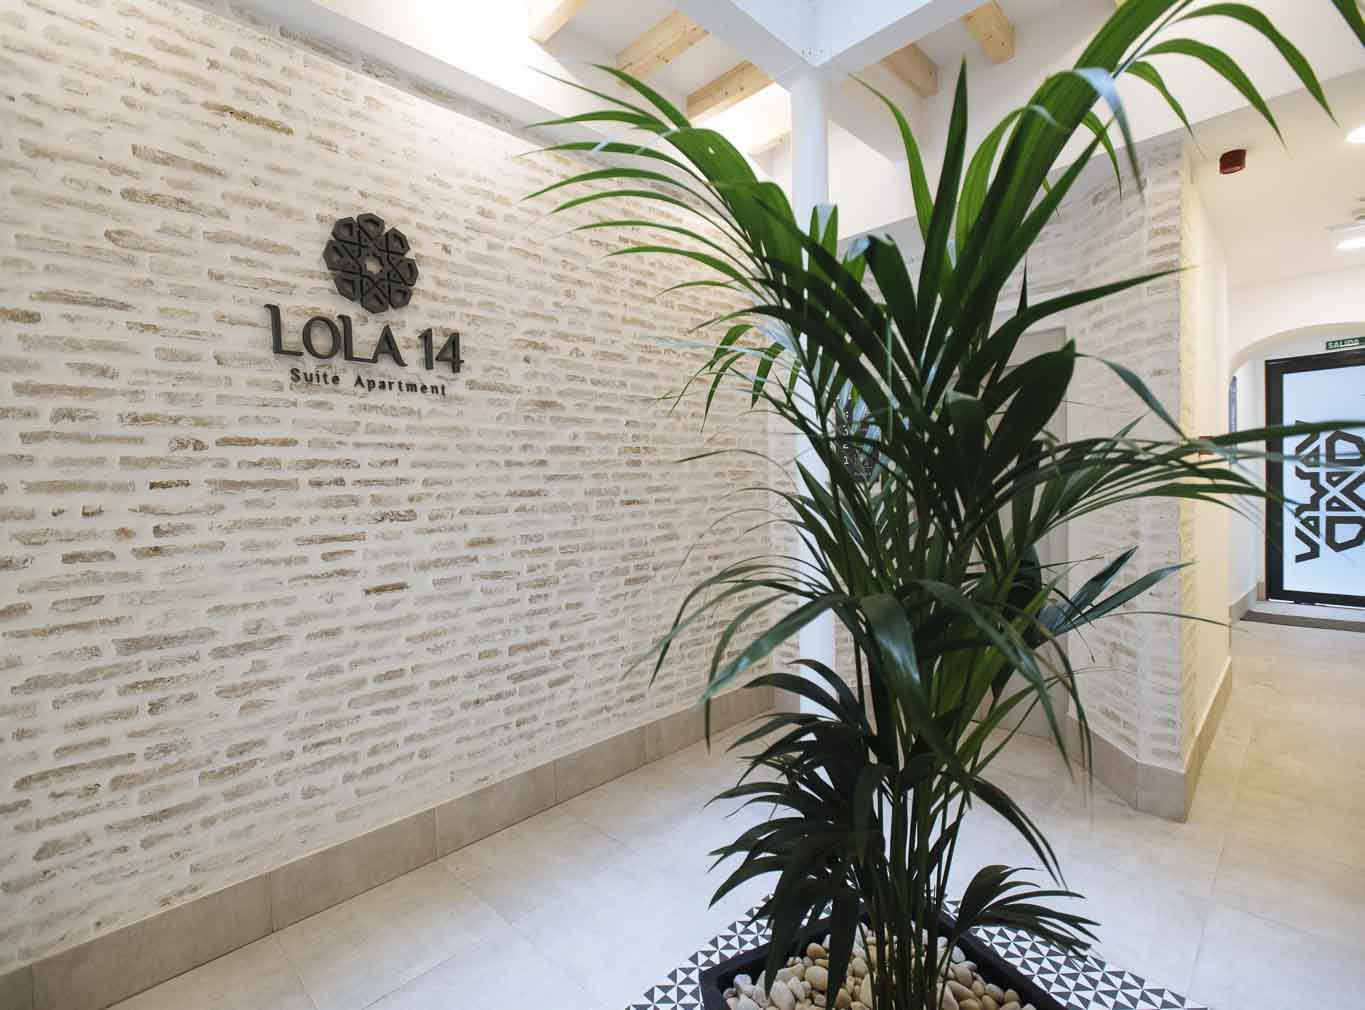 Lola 14 Tourist apartments with pool in Seville – Magno Apartments